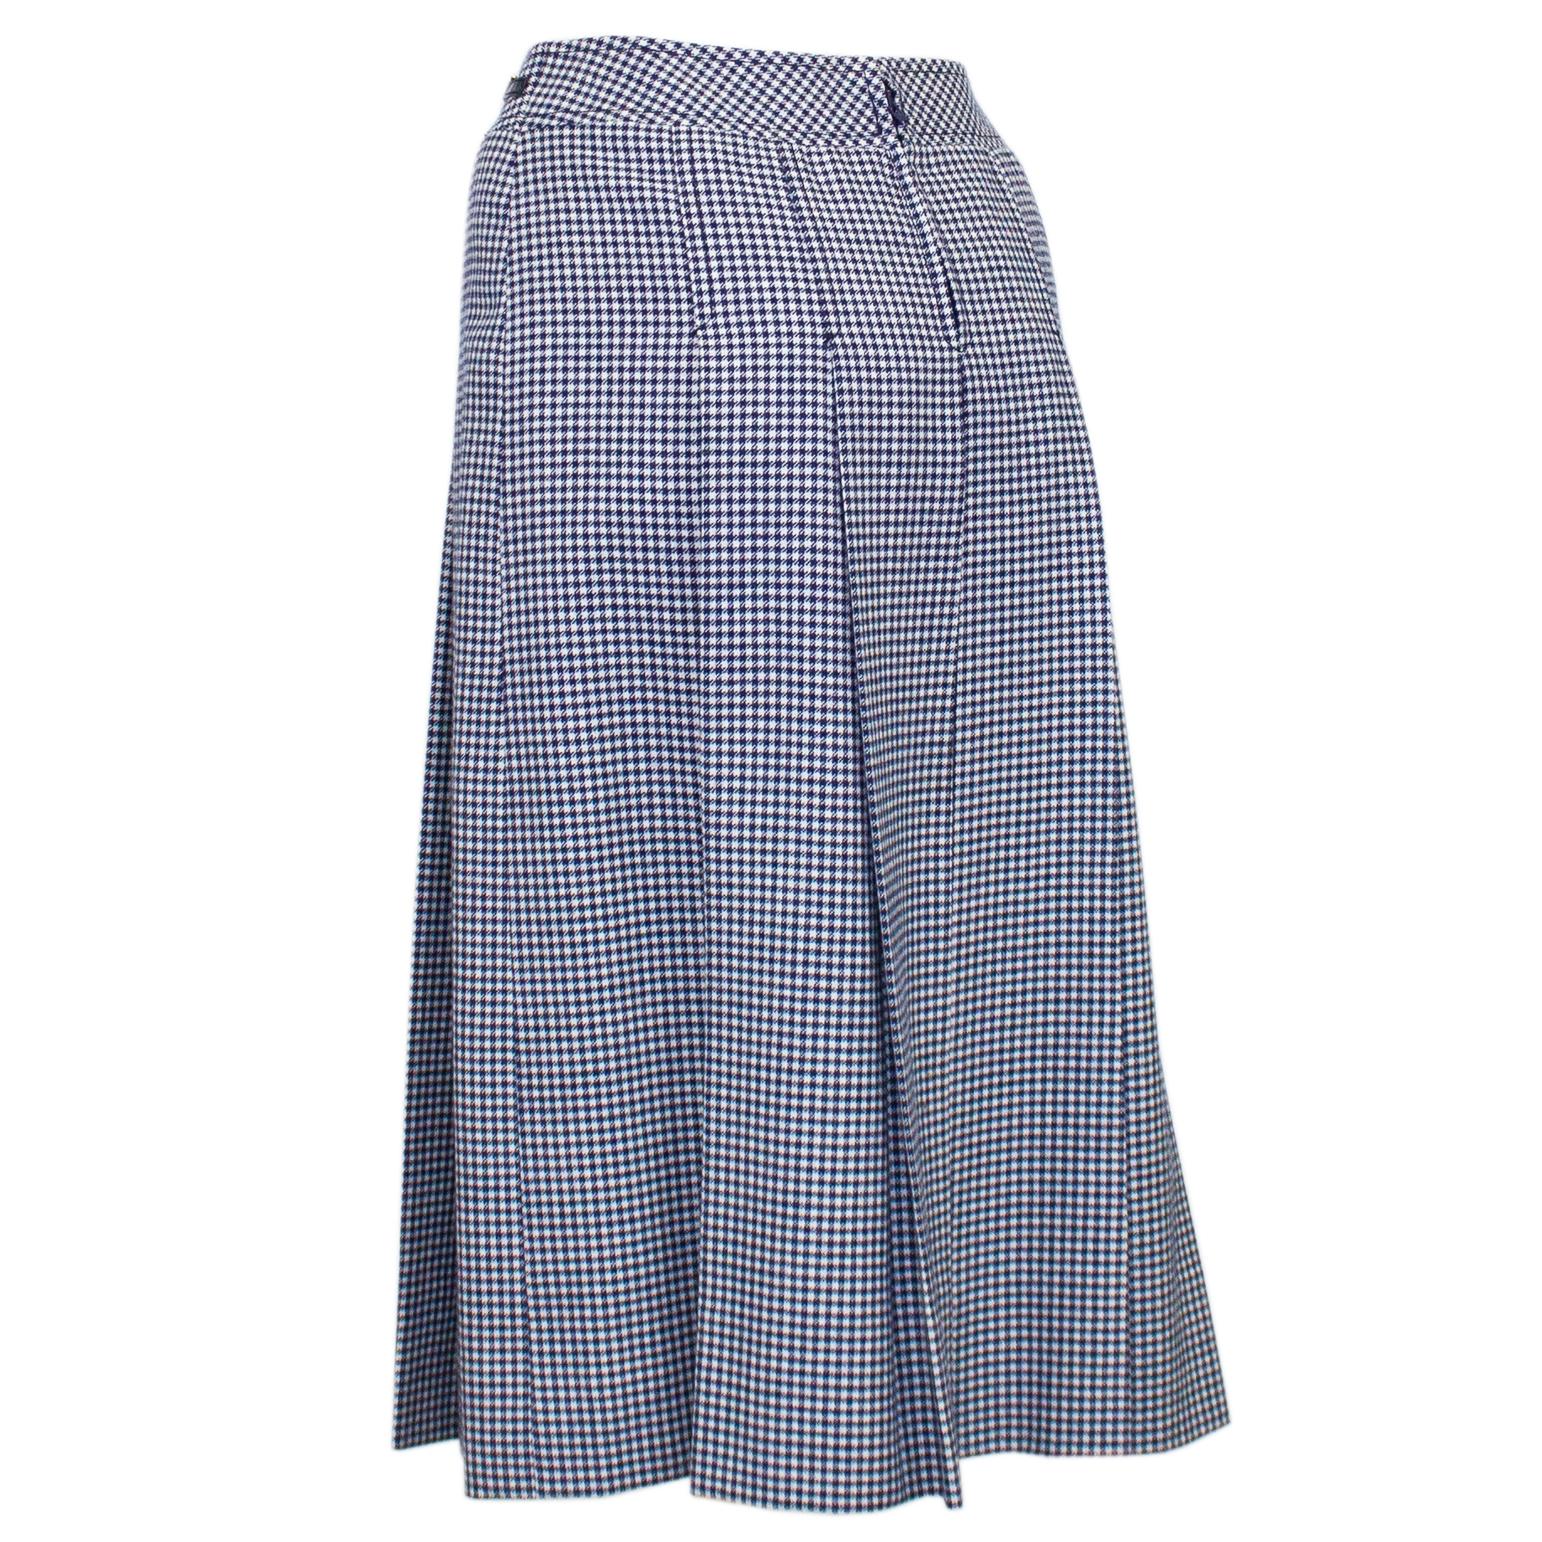 1970s Celine Navy Houndstooth Wool Skirt In Good Condition For Sale In Toronto, Ontario